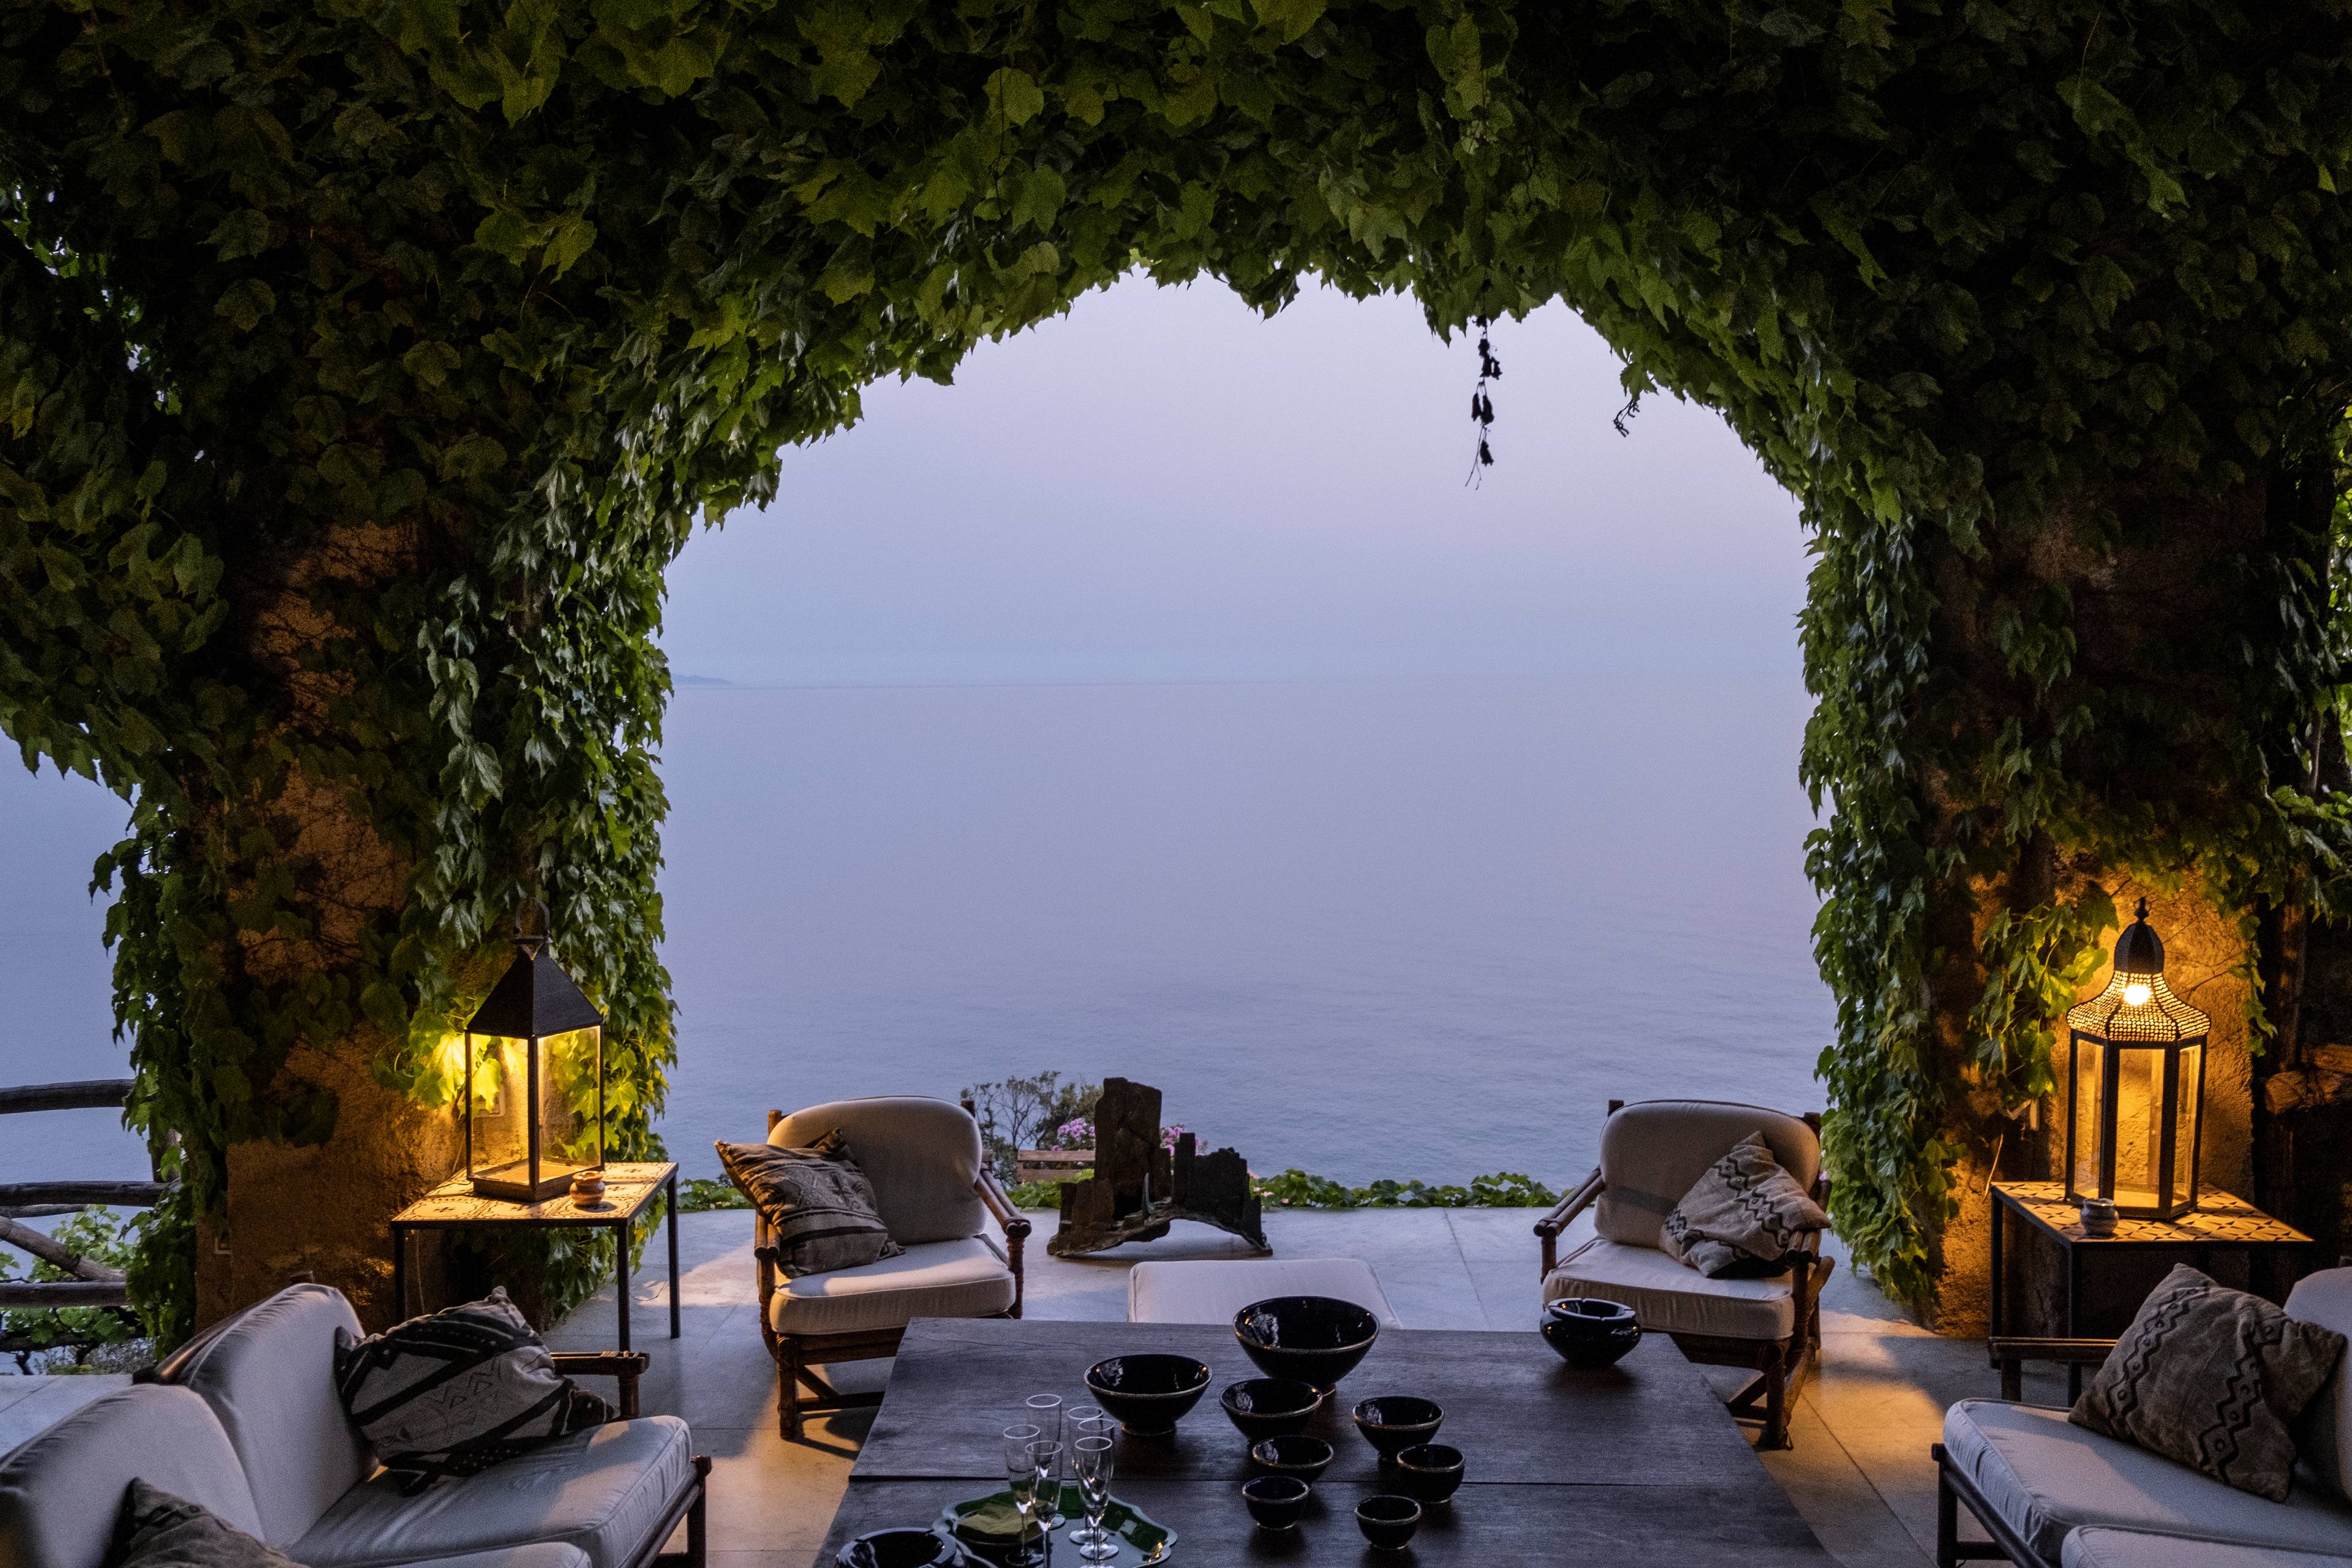 MAGNIFICENT VILLA IN THE HEART OF AMALFI COAST WITH SEA VIEW, DIRECT ACCESS TO THE SEA